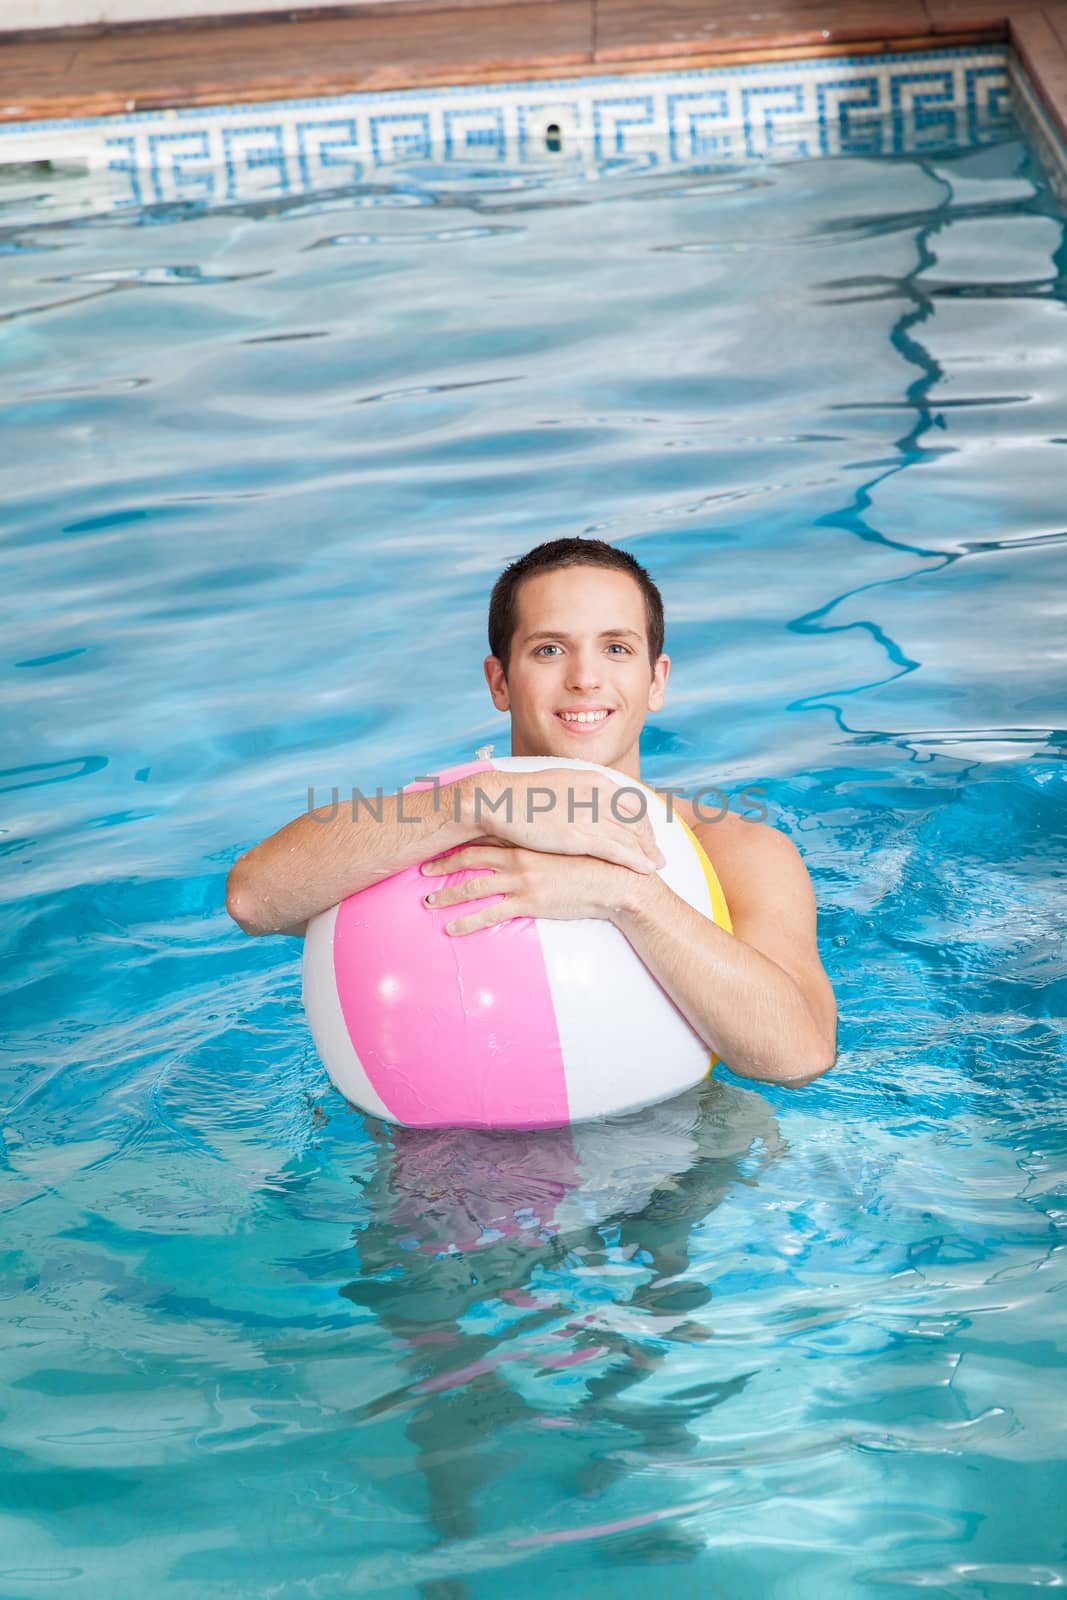 Man in the pool with inflatable ball